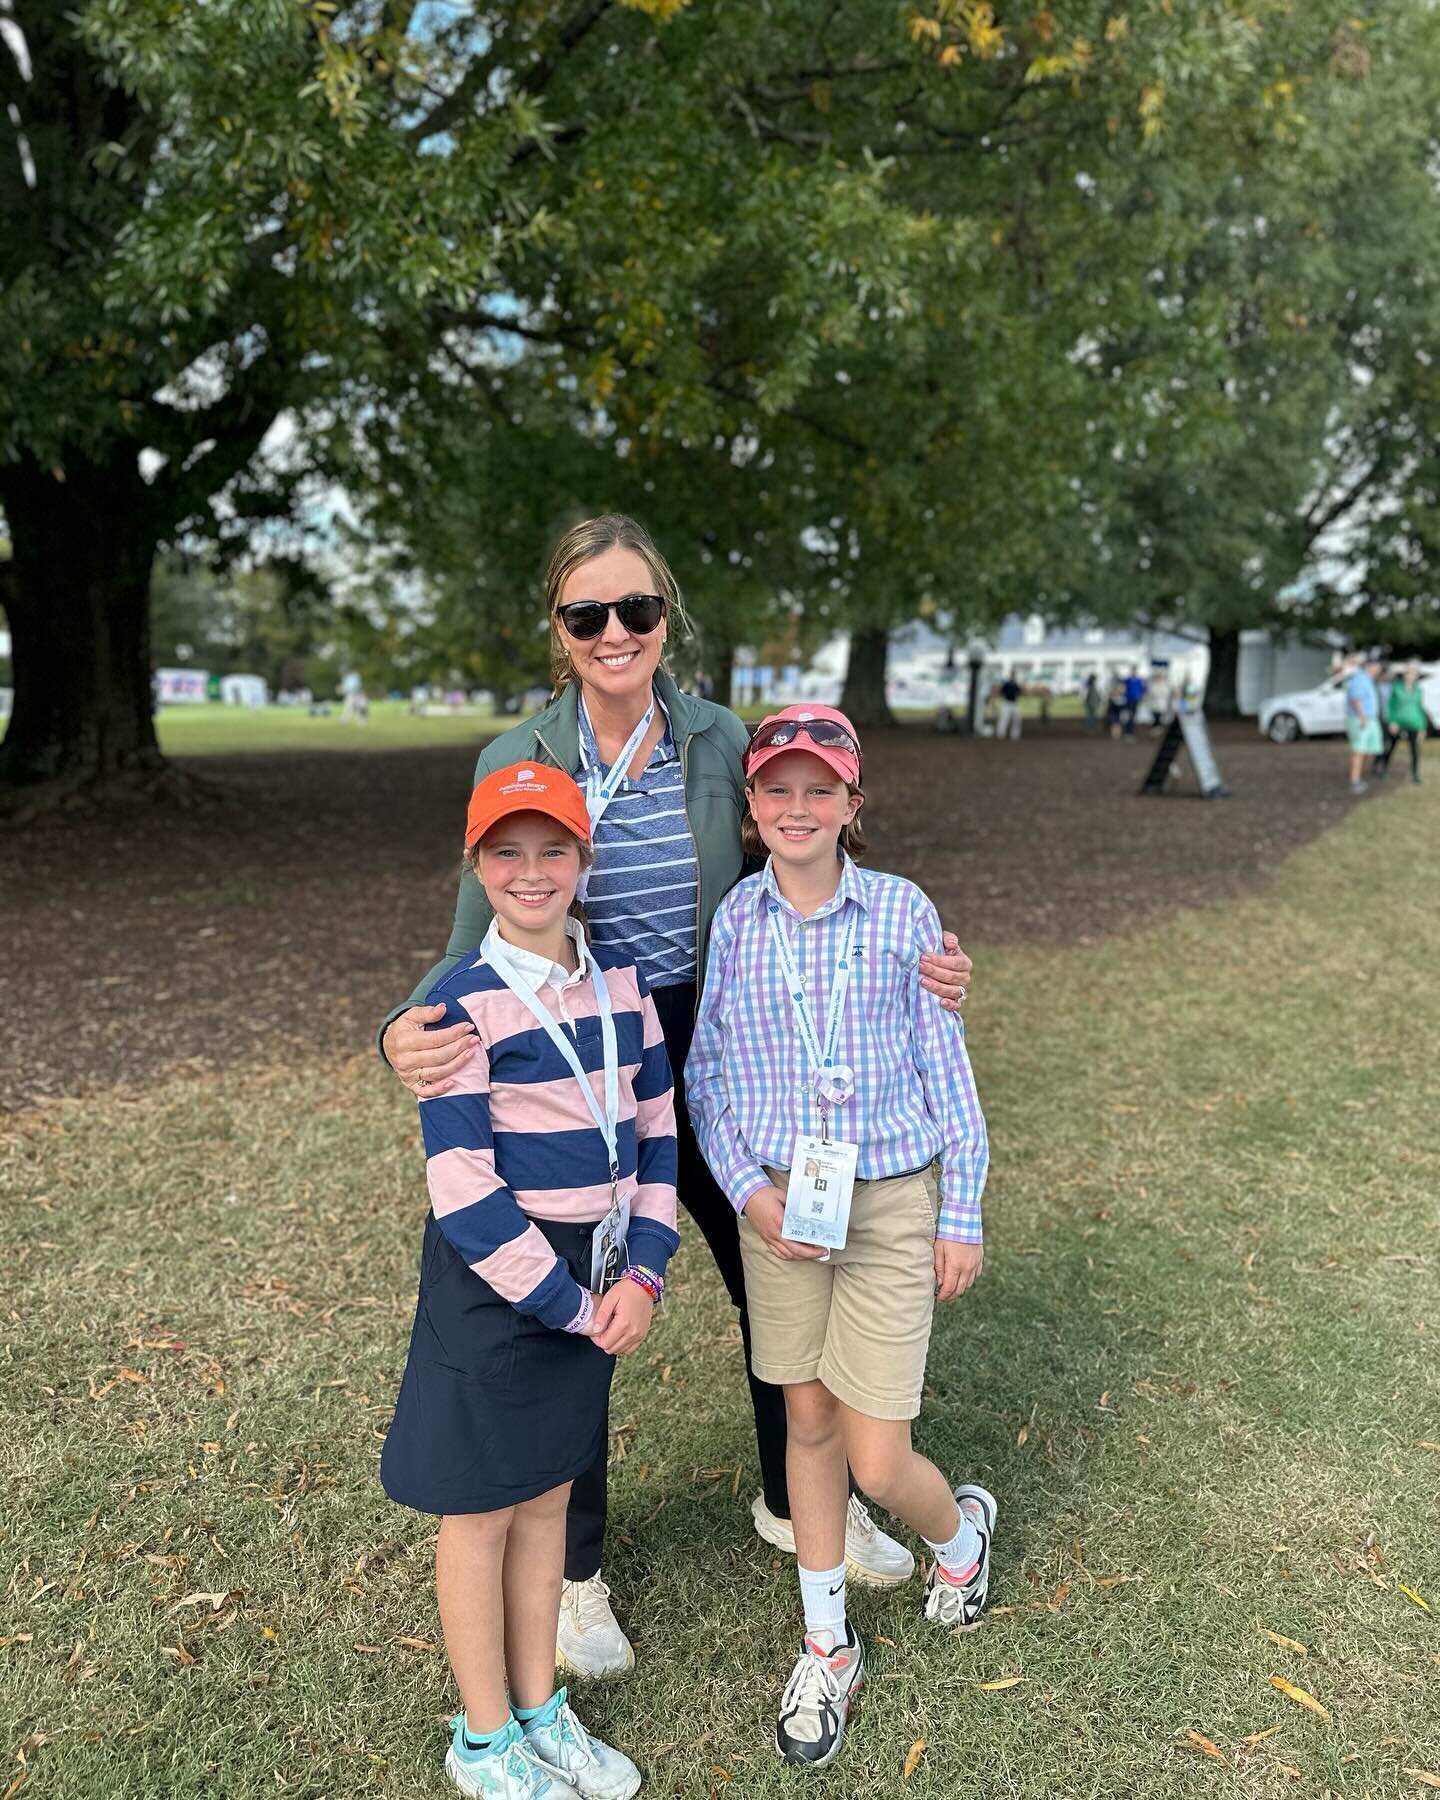 It&rsquo;s #deccsunday and that means it&rsquo;s family day for the WSA #babyinterns. They are earning their keep by supervising the fan zone and the clubhouse dessert table. #babyVIPs #workworkwork #lastdaybestday #deccgolf